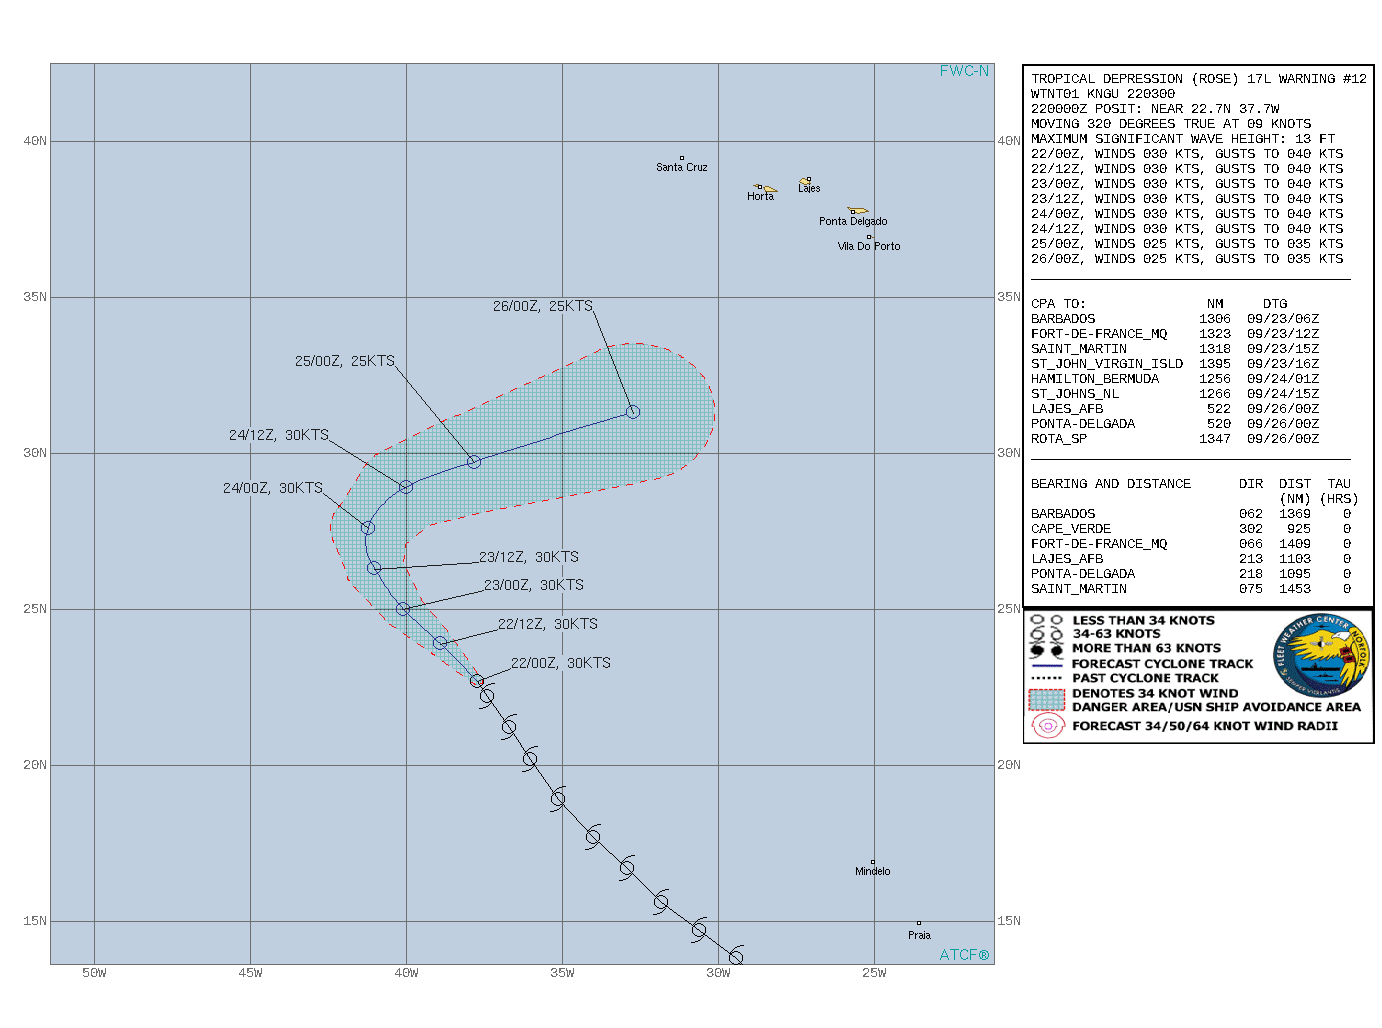 TD 17L(ROSE). WARNING 12 ISSUED AT 22/03UTC. CURRENT INTENSITY IS 30KNOTS AND IS FORECAST TO BE DOWN TO 25KNOTS BY 25/00UTC.